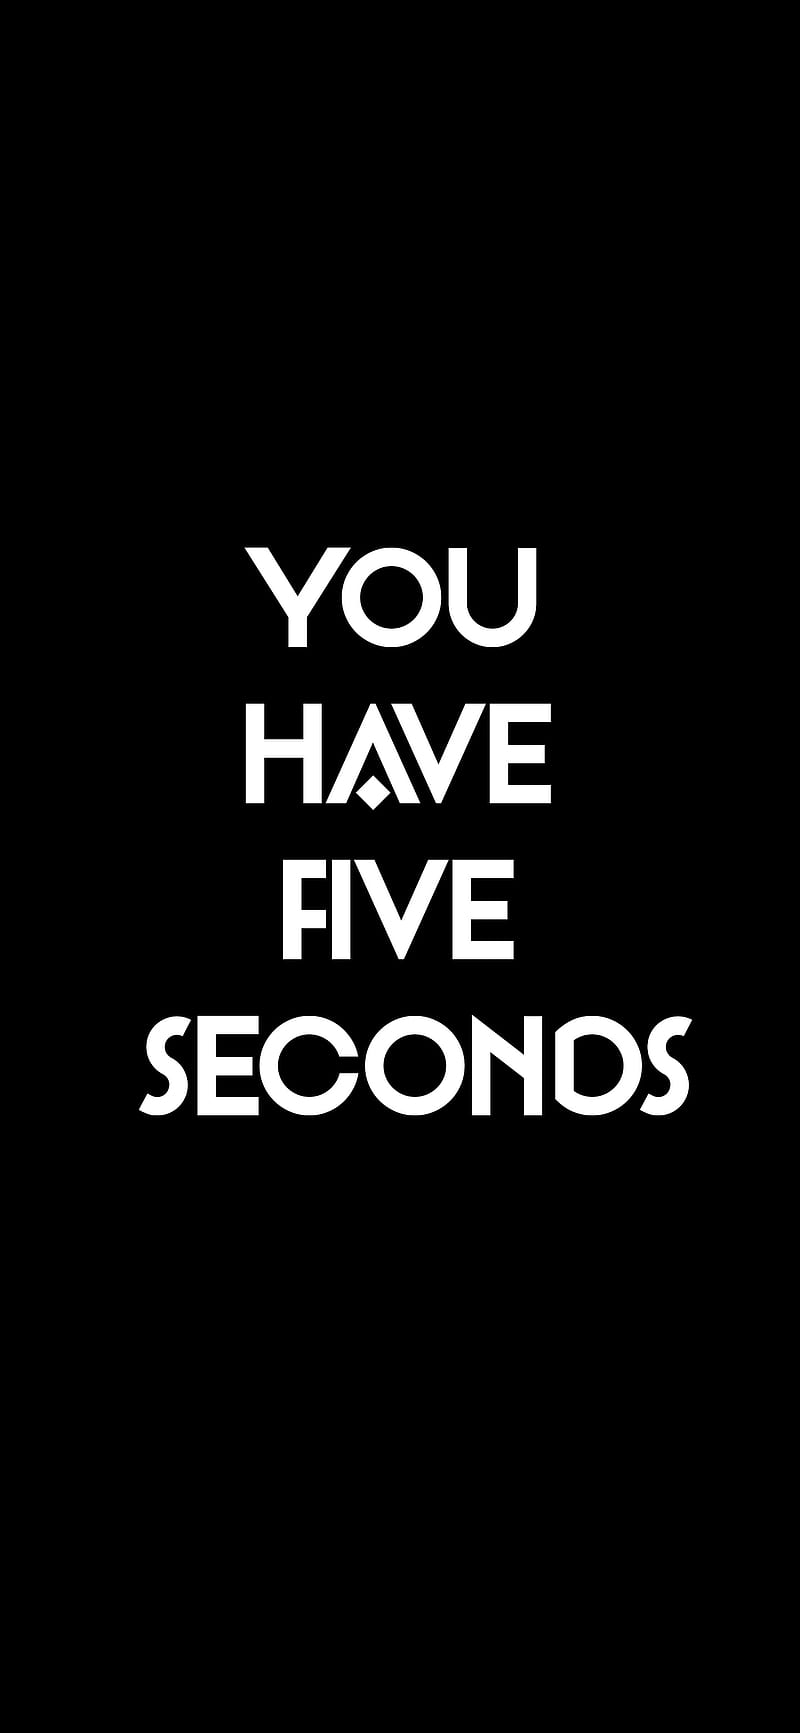 The 5-Second Rule